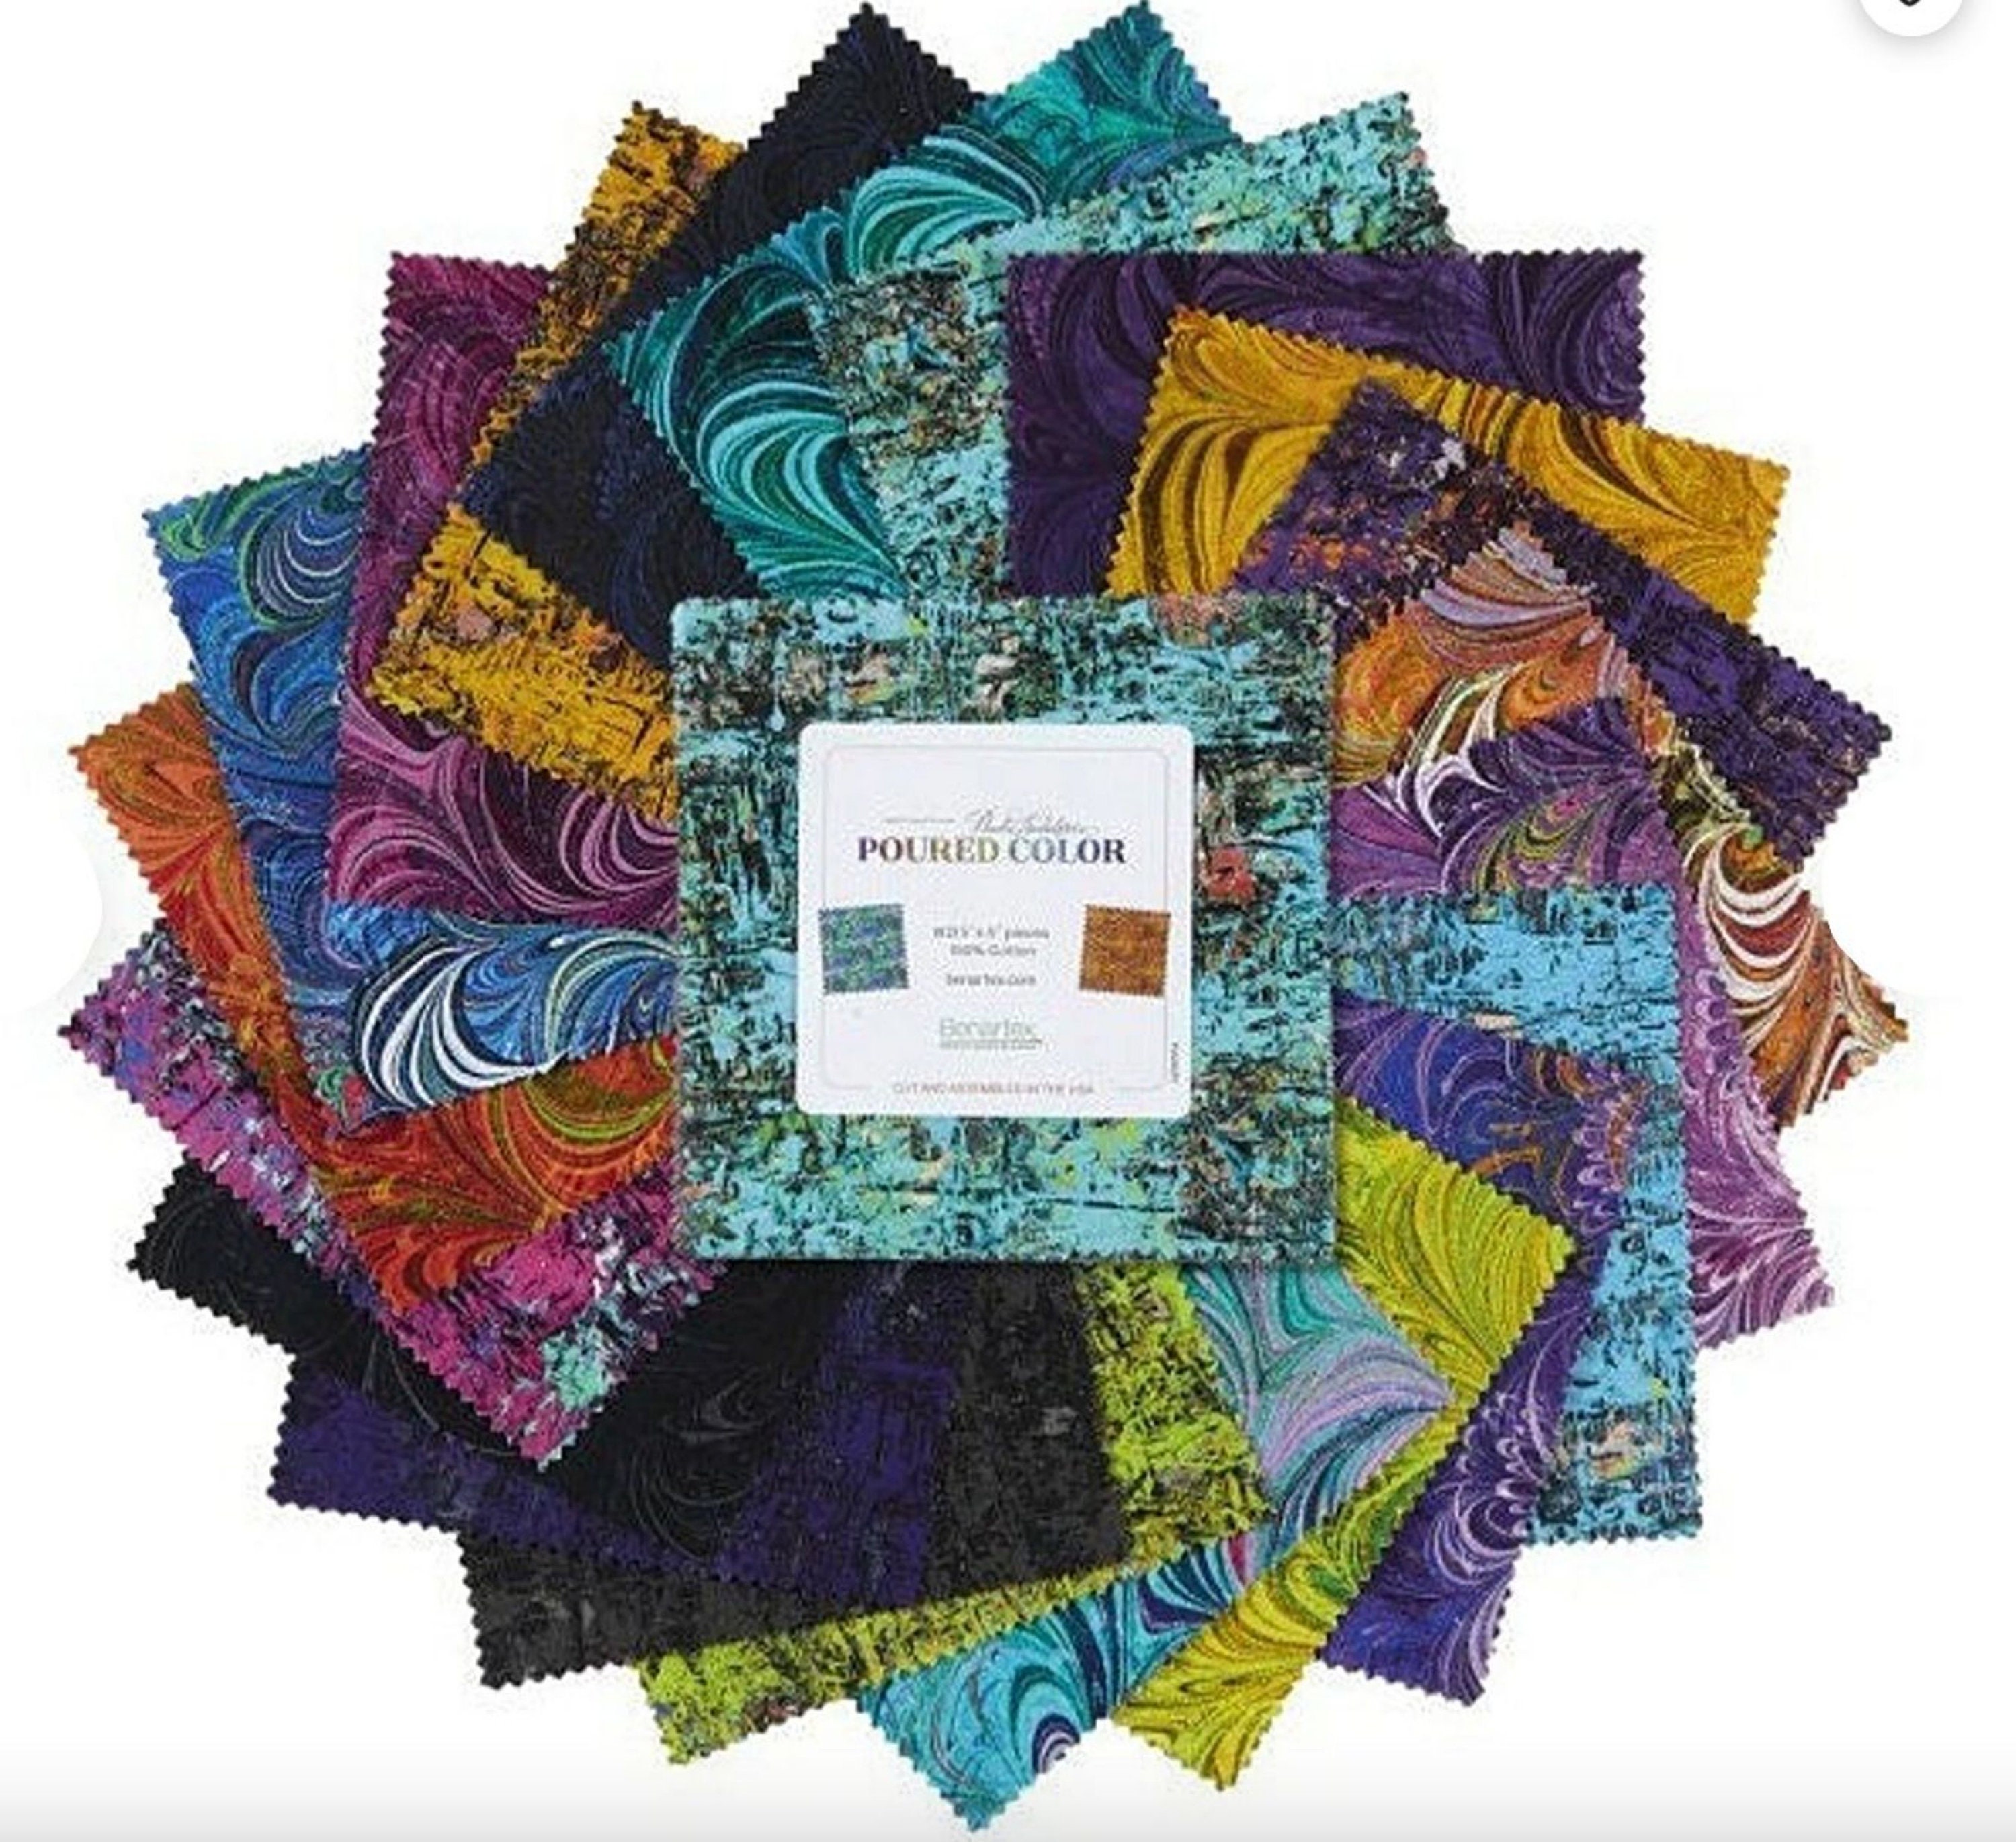 Moonlight Garden Quilt Fabric - 10x10 Pack - set of 42 10 squares